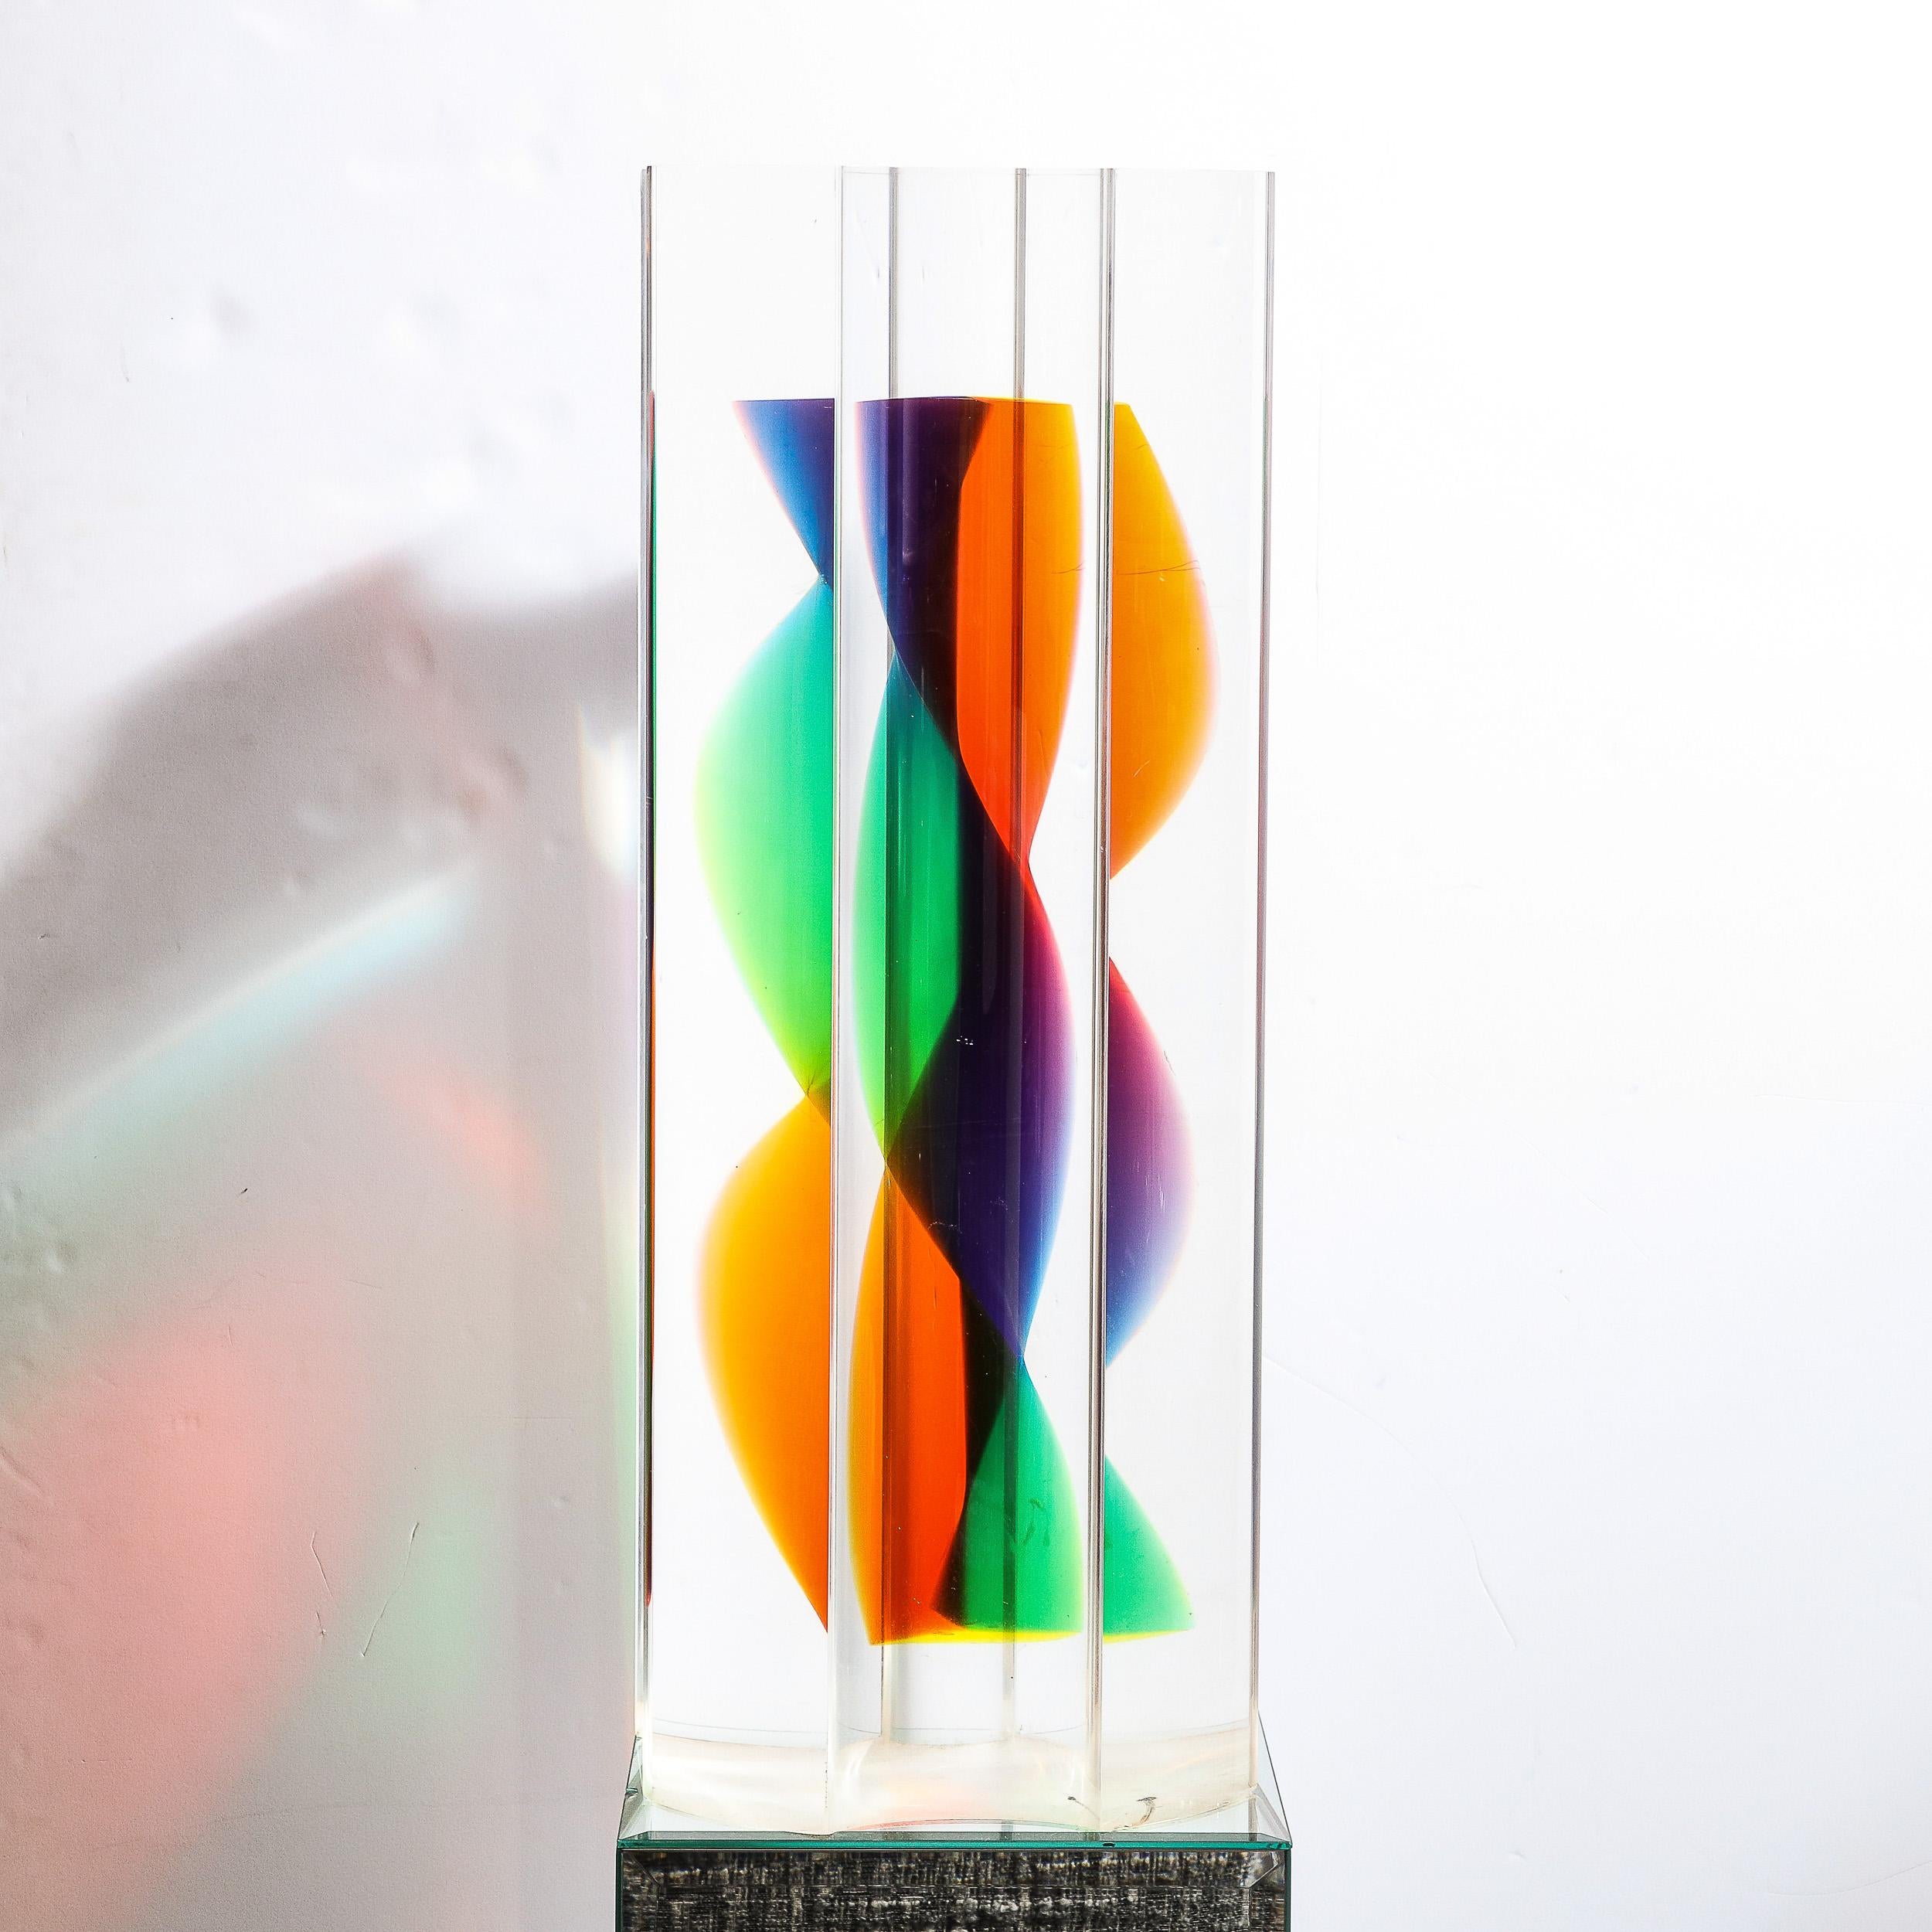 This stunning modernist polychromatic caste acrylic abstract sculpture was realized by the esteemed artist Norman Mercer in the United States circa 1990. It features a volumetric cylindrical form with a demilune depressions creating a scalloped